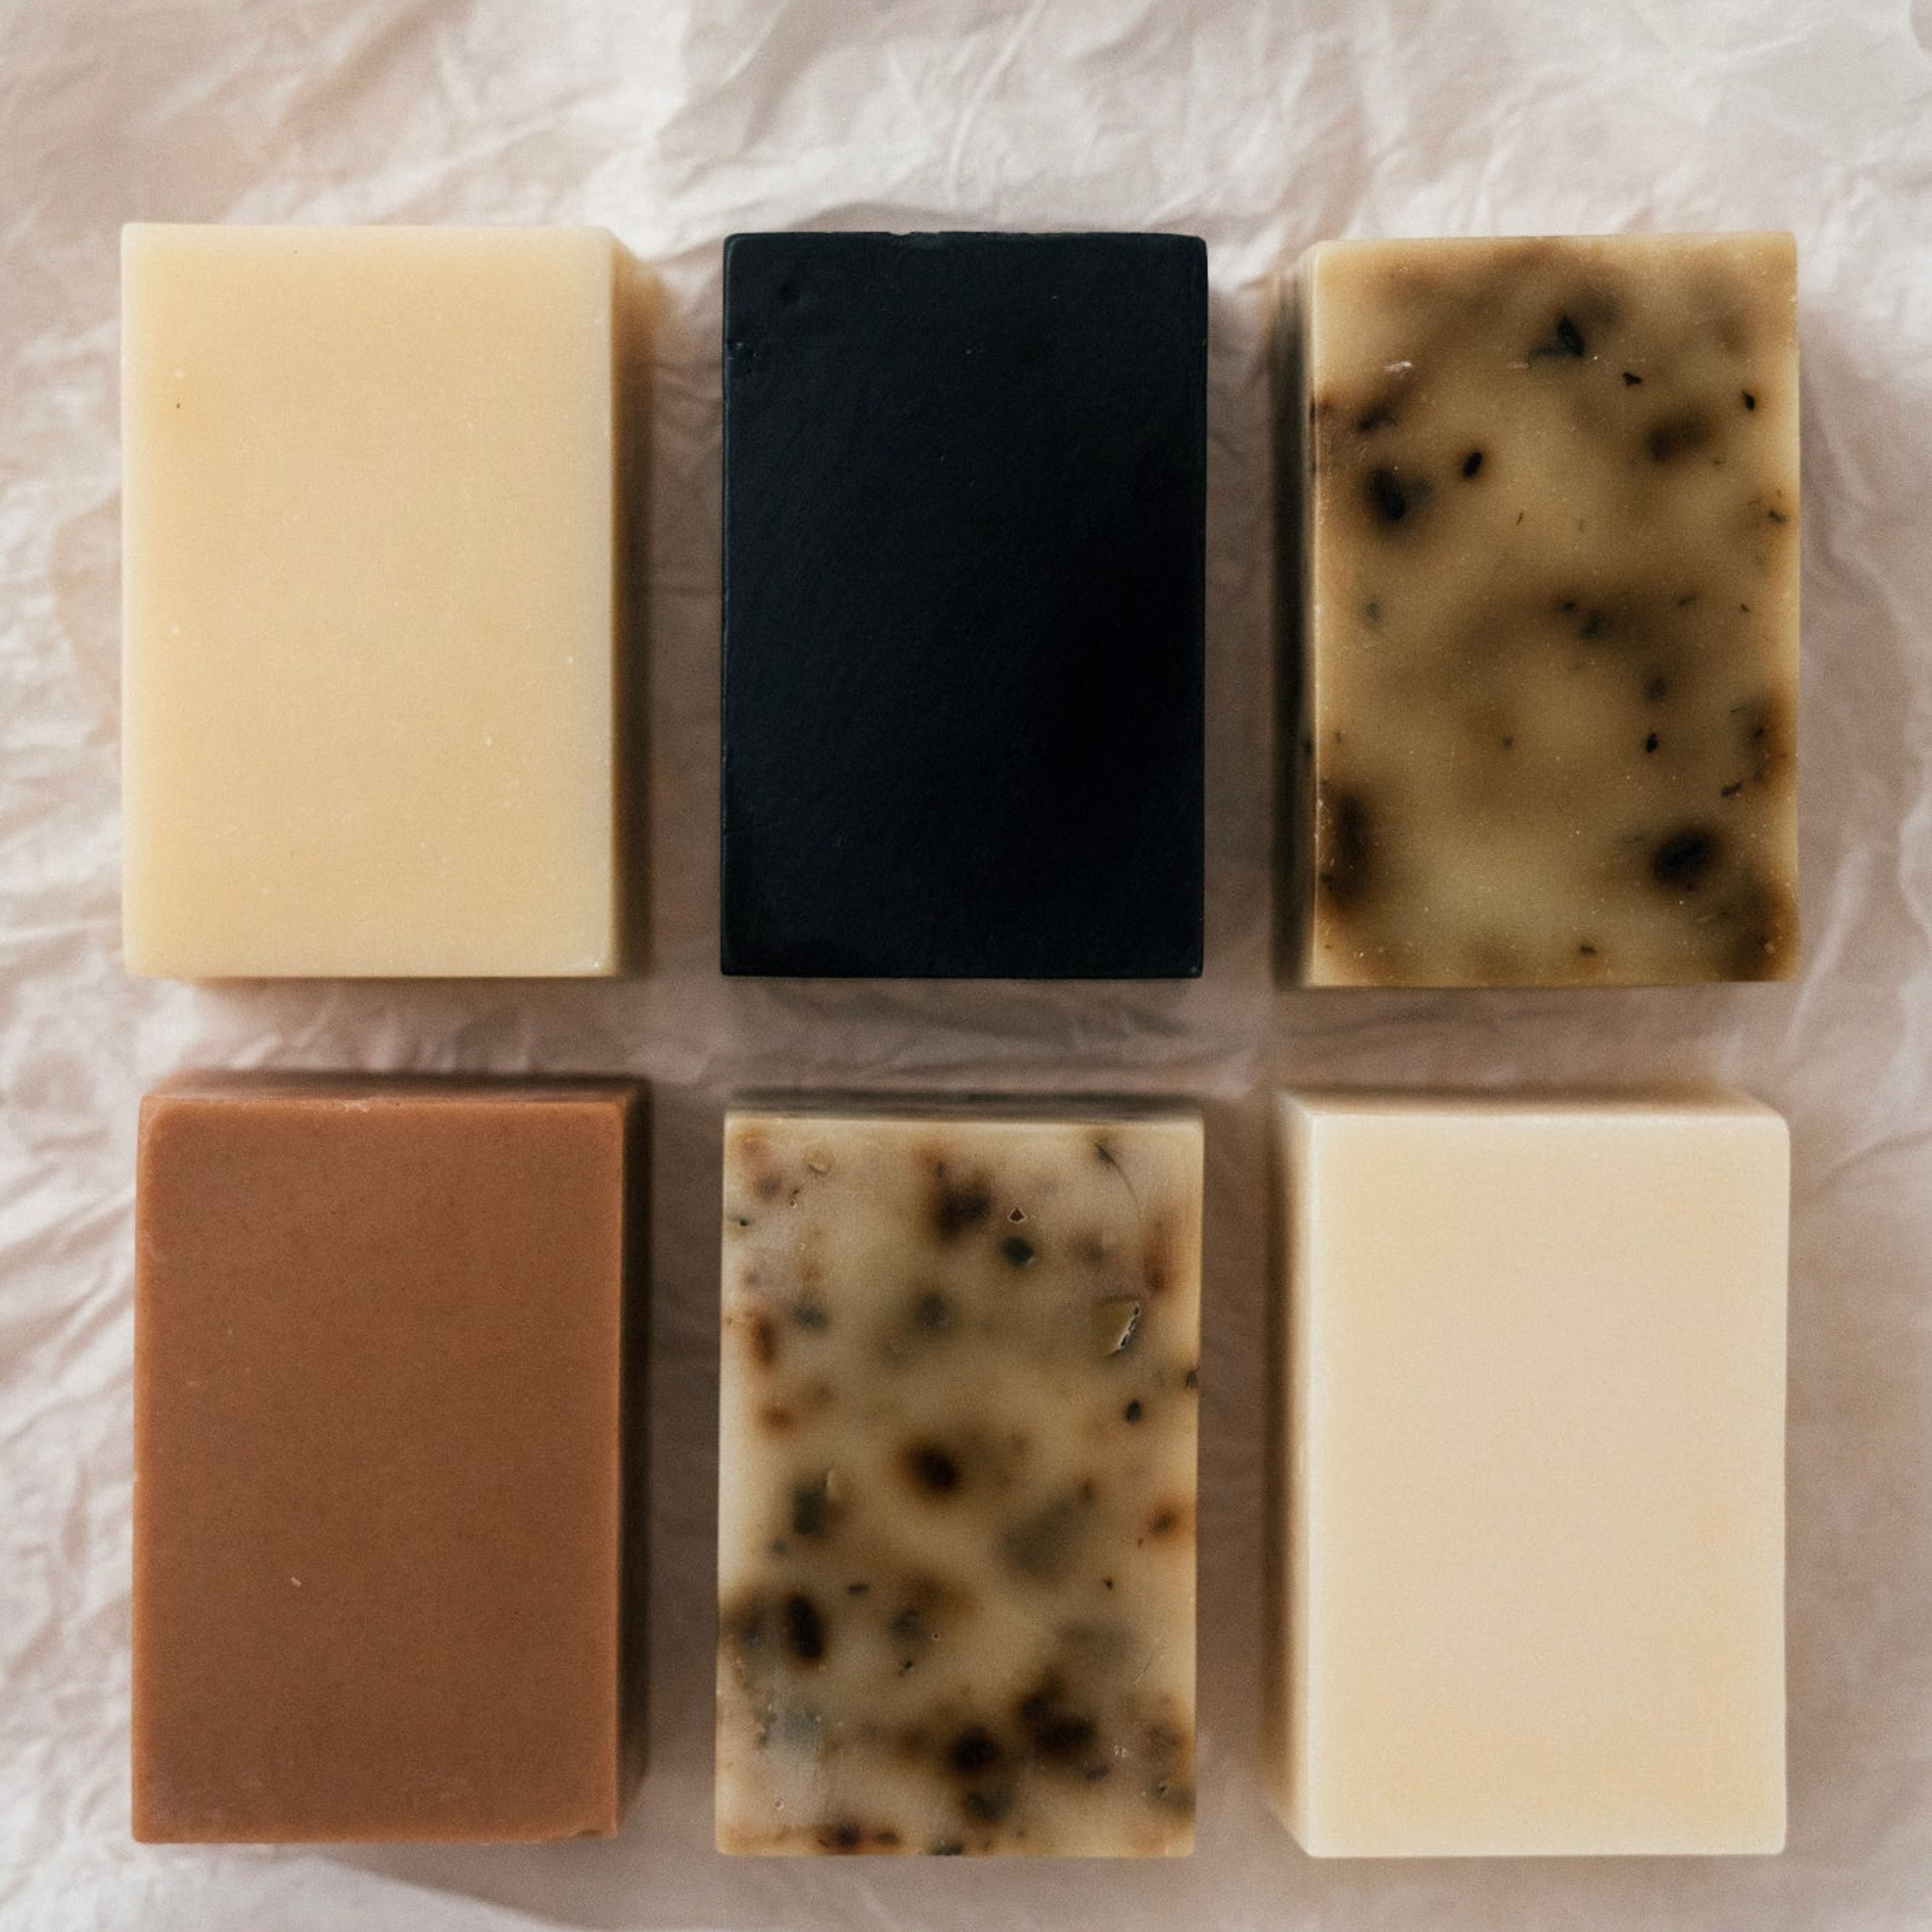 Tallow Soap Core Collection (6 Bars) - Regenerative Tallow